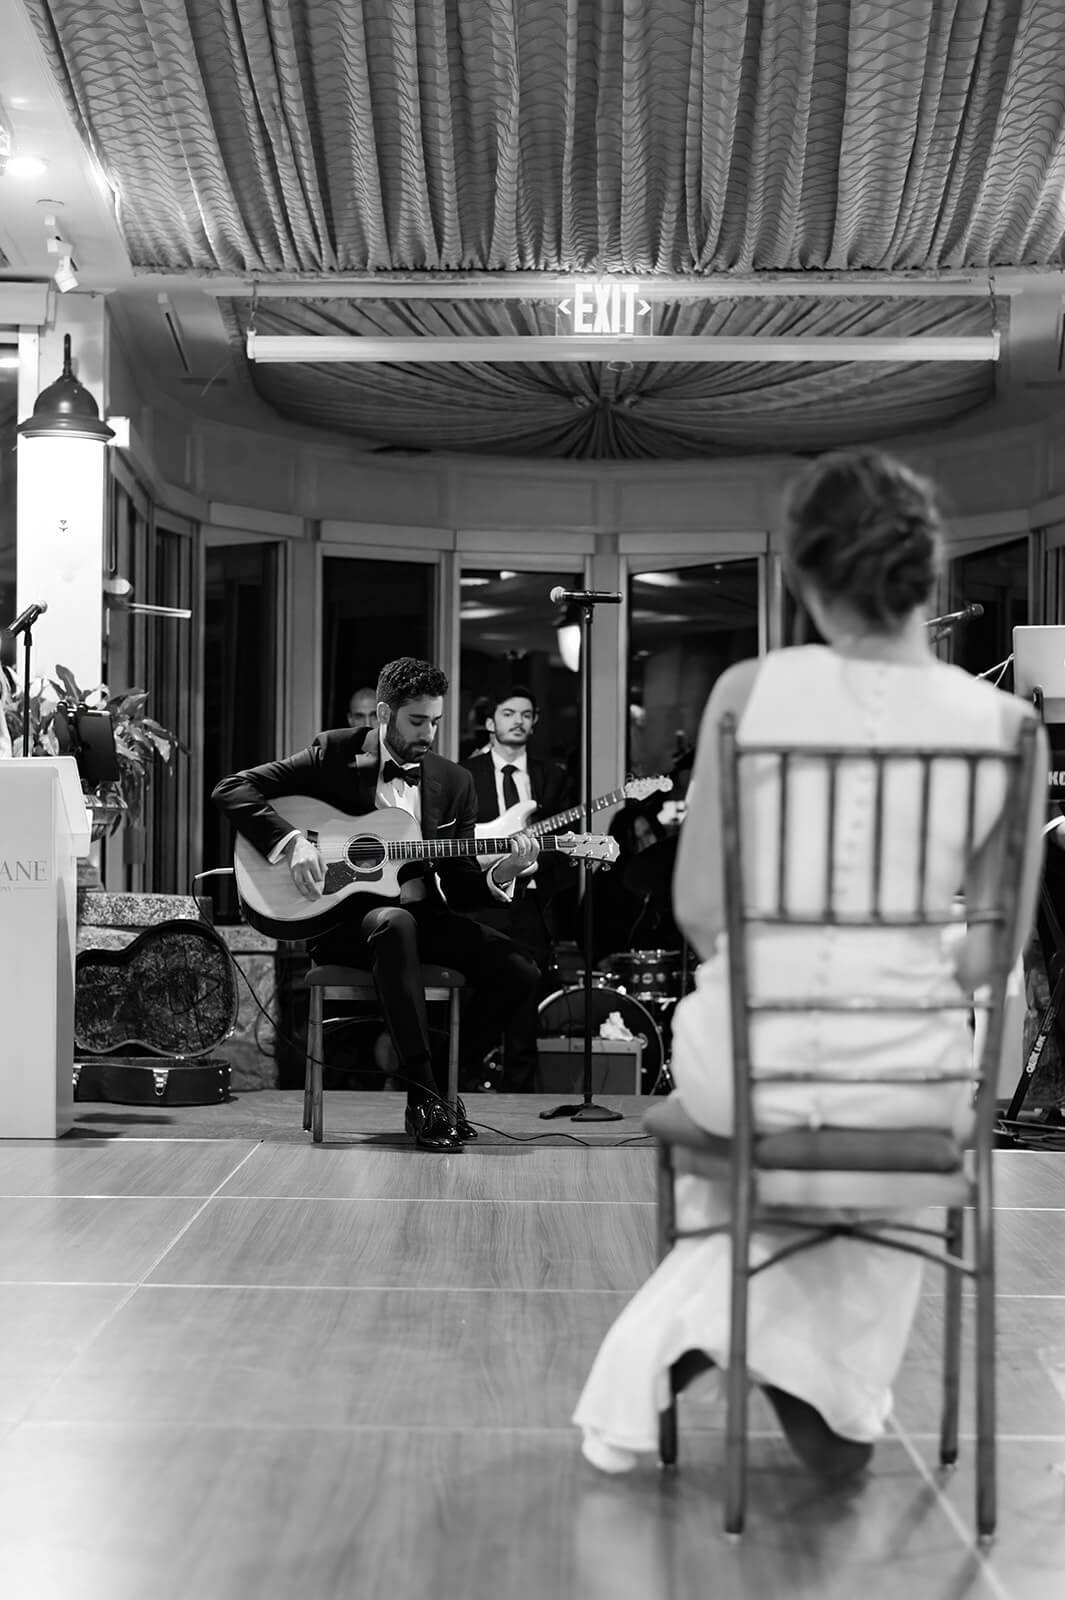 Groom singing a song to his bride on a acoustic guitar